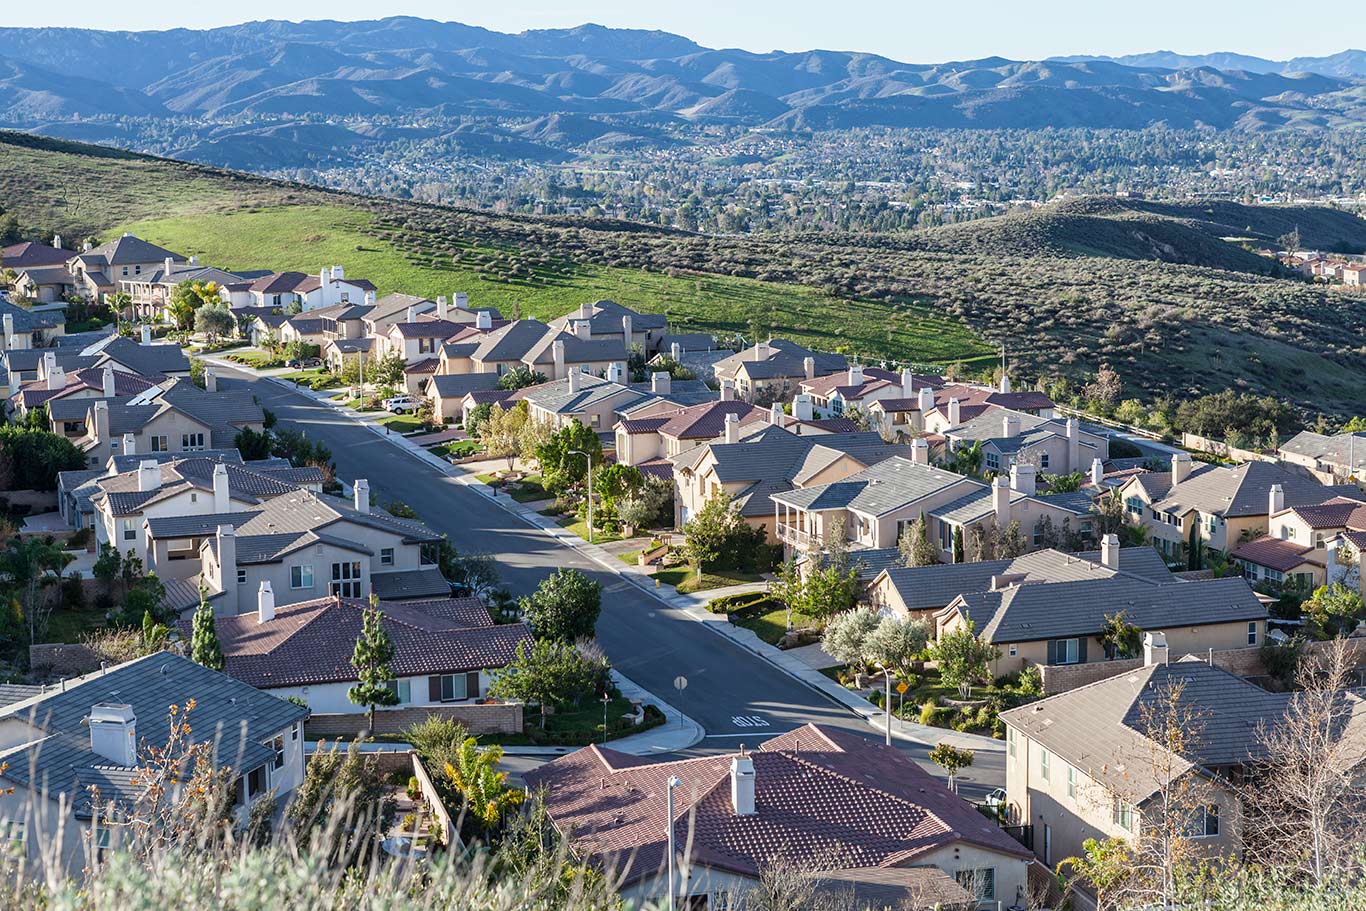 Sell Your House Fast in Murrieta, CA